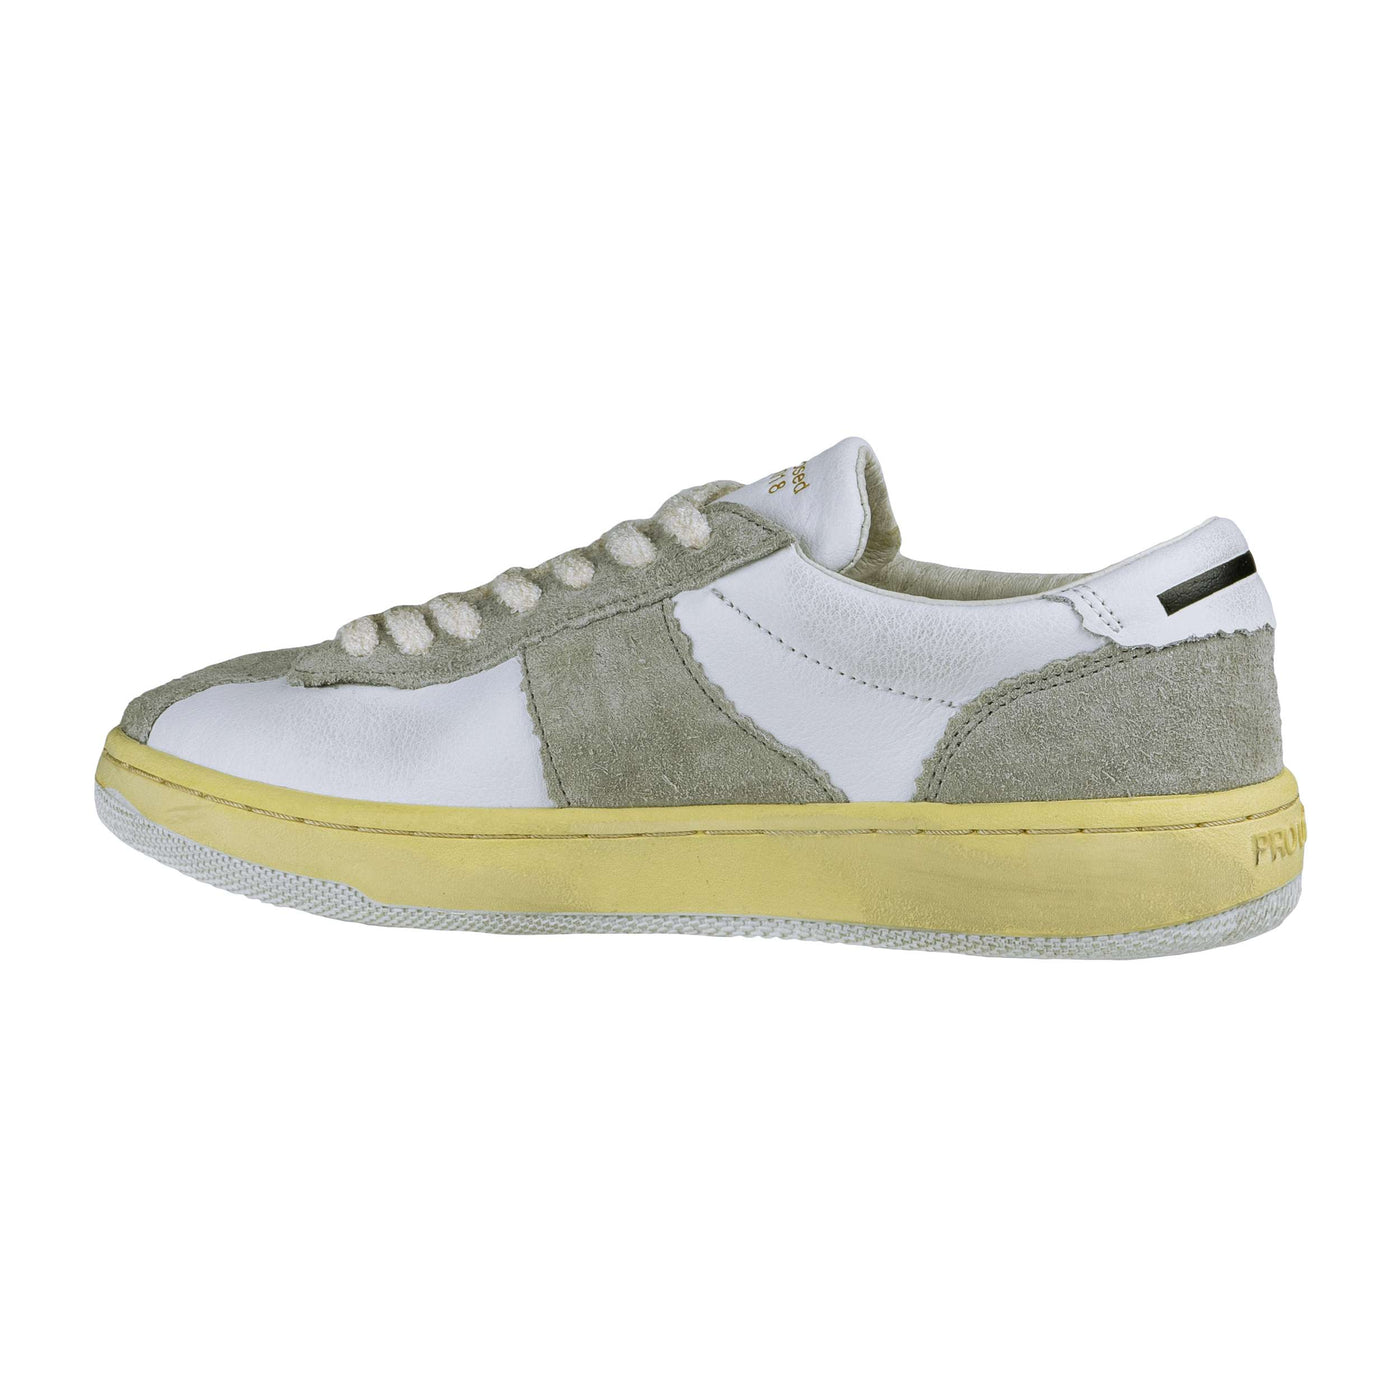 PRO 01 JECT P5LW CE05 SNEAKERS SUEDE/LEATHER WHITE/GREY